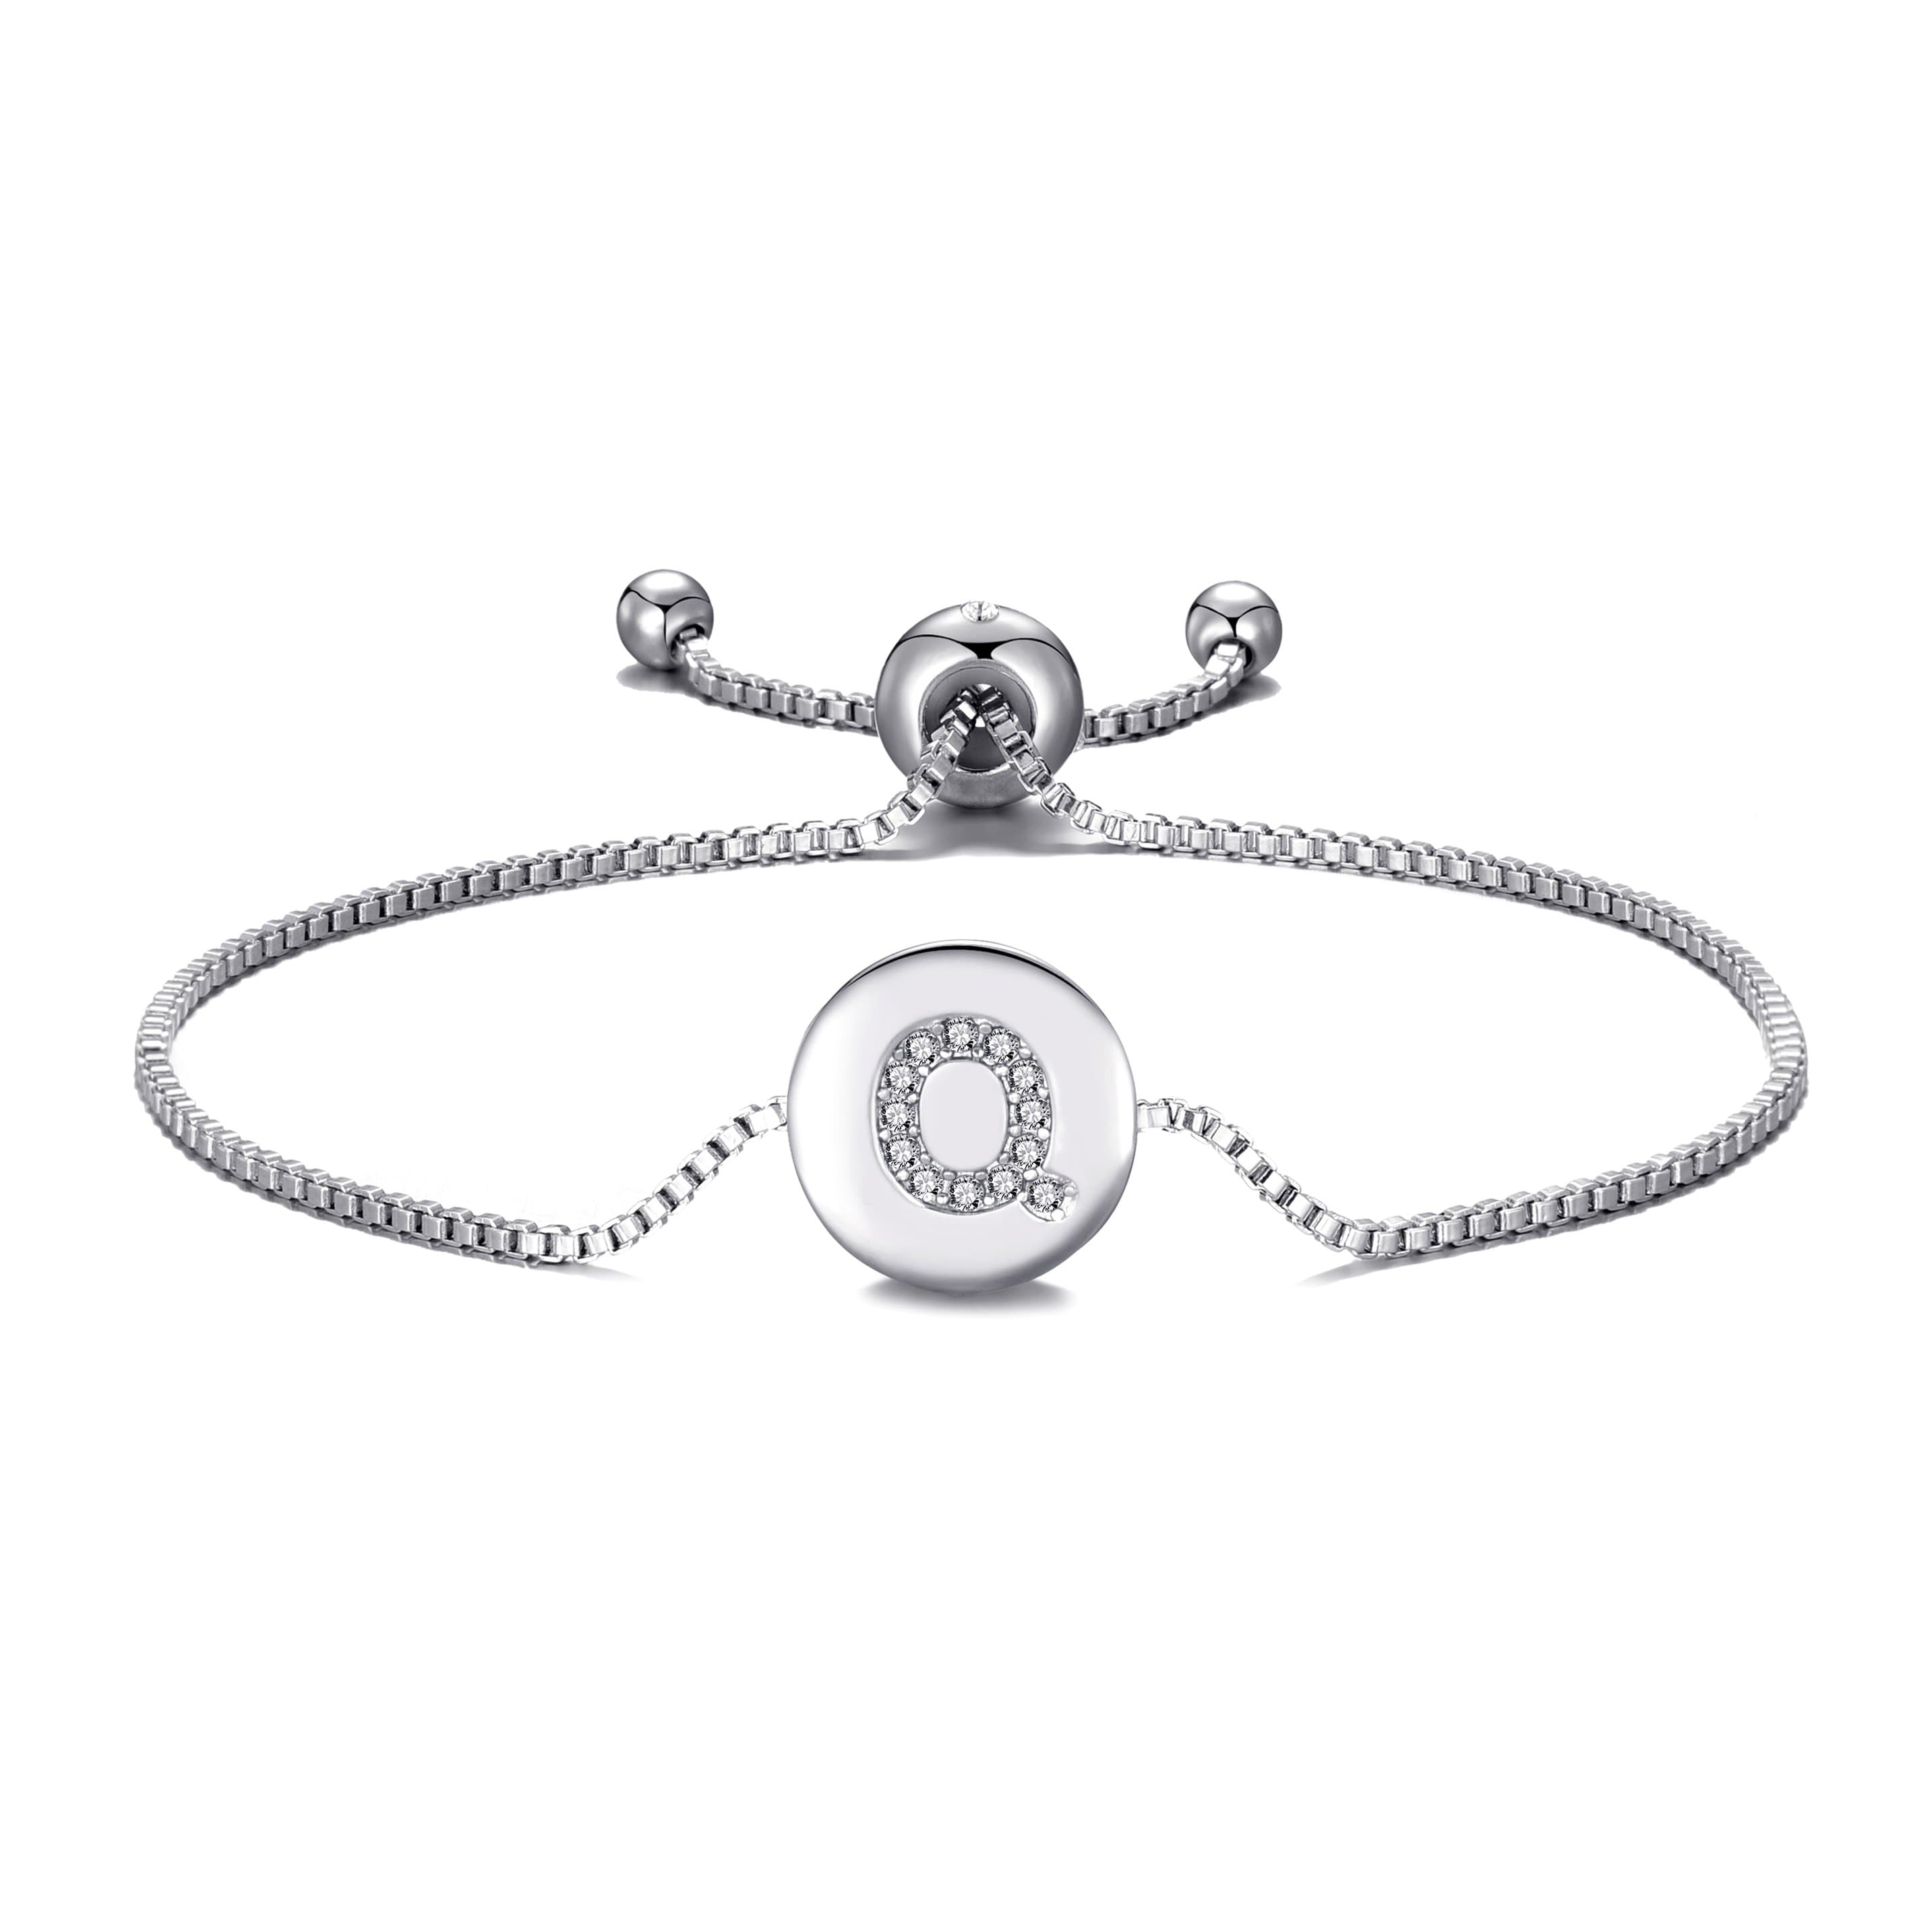 Initial Friendship Bracelet Letter Q Created with Zircondia® Crystals by Philip Jones Jewellery